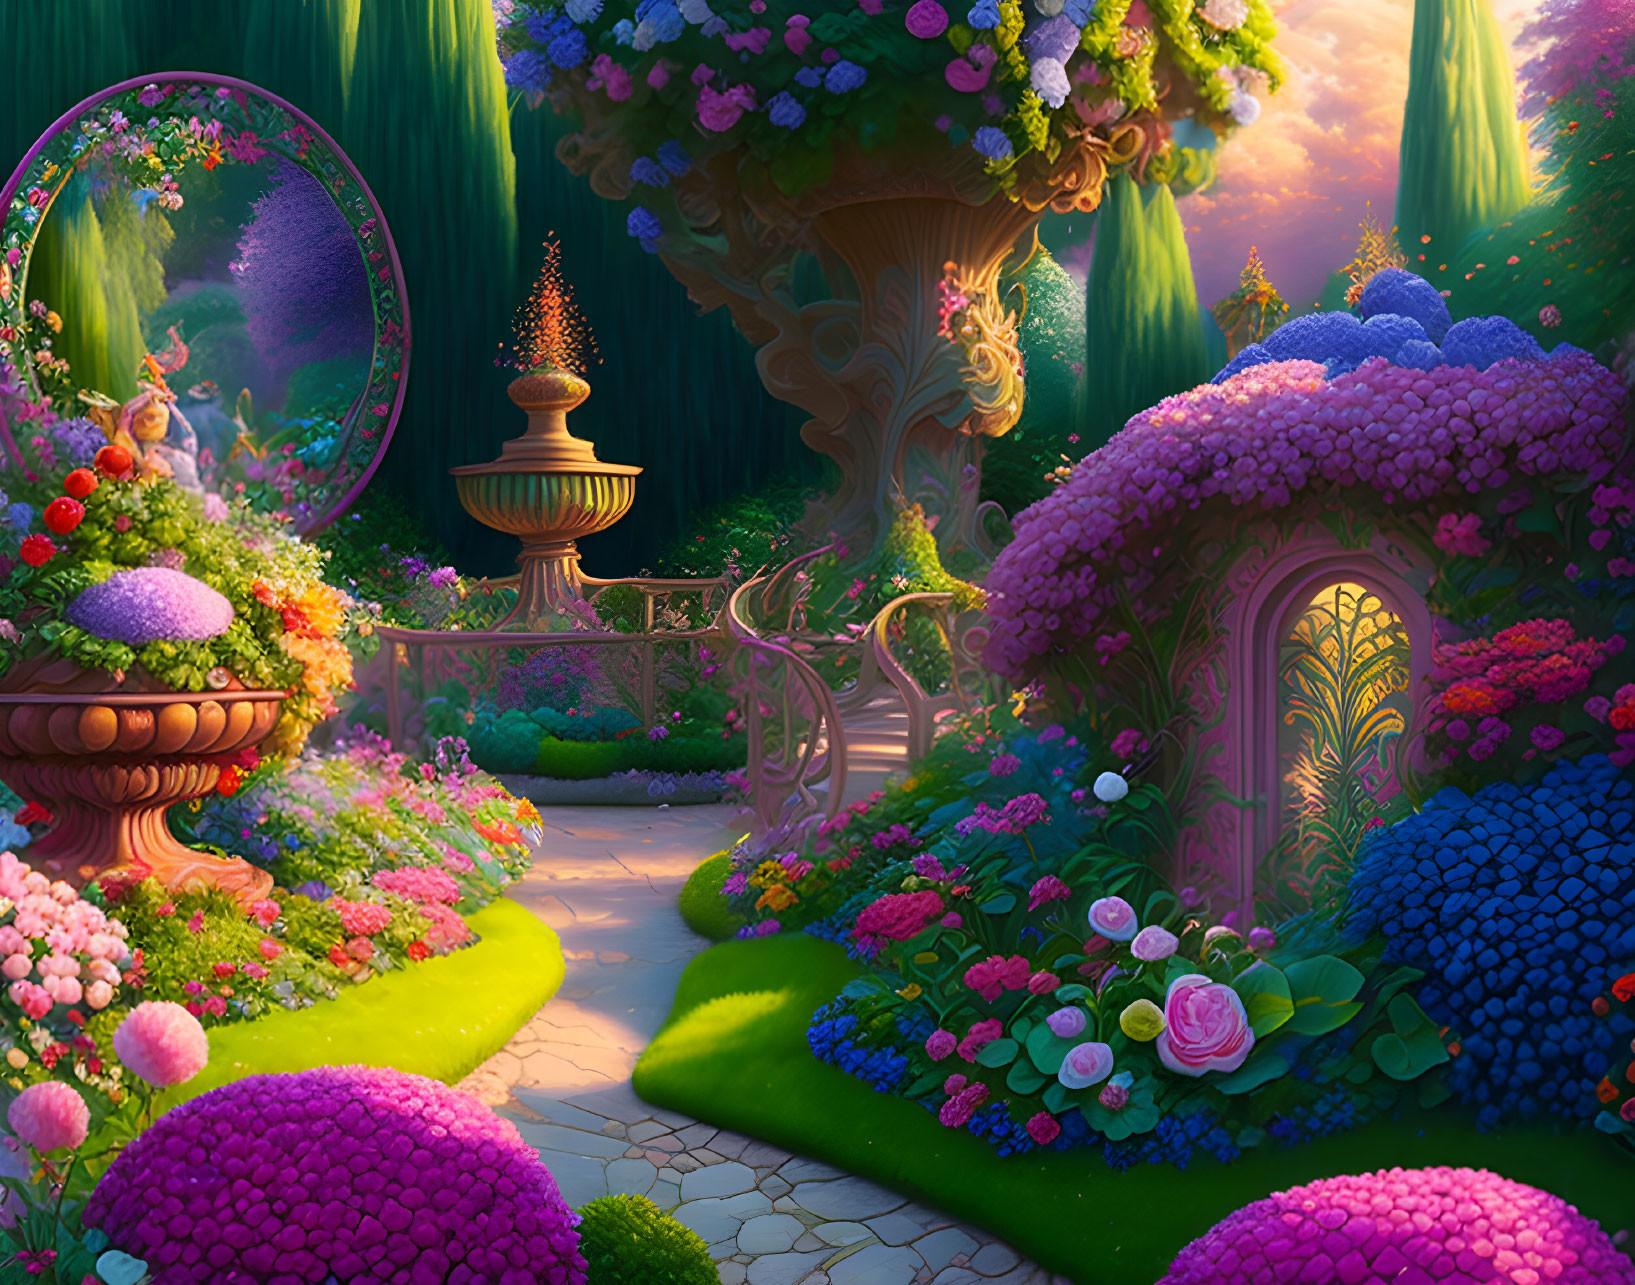 Colorful garden with lush flowers and ornate structures